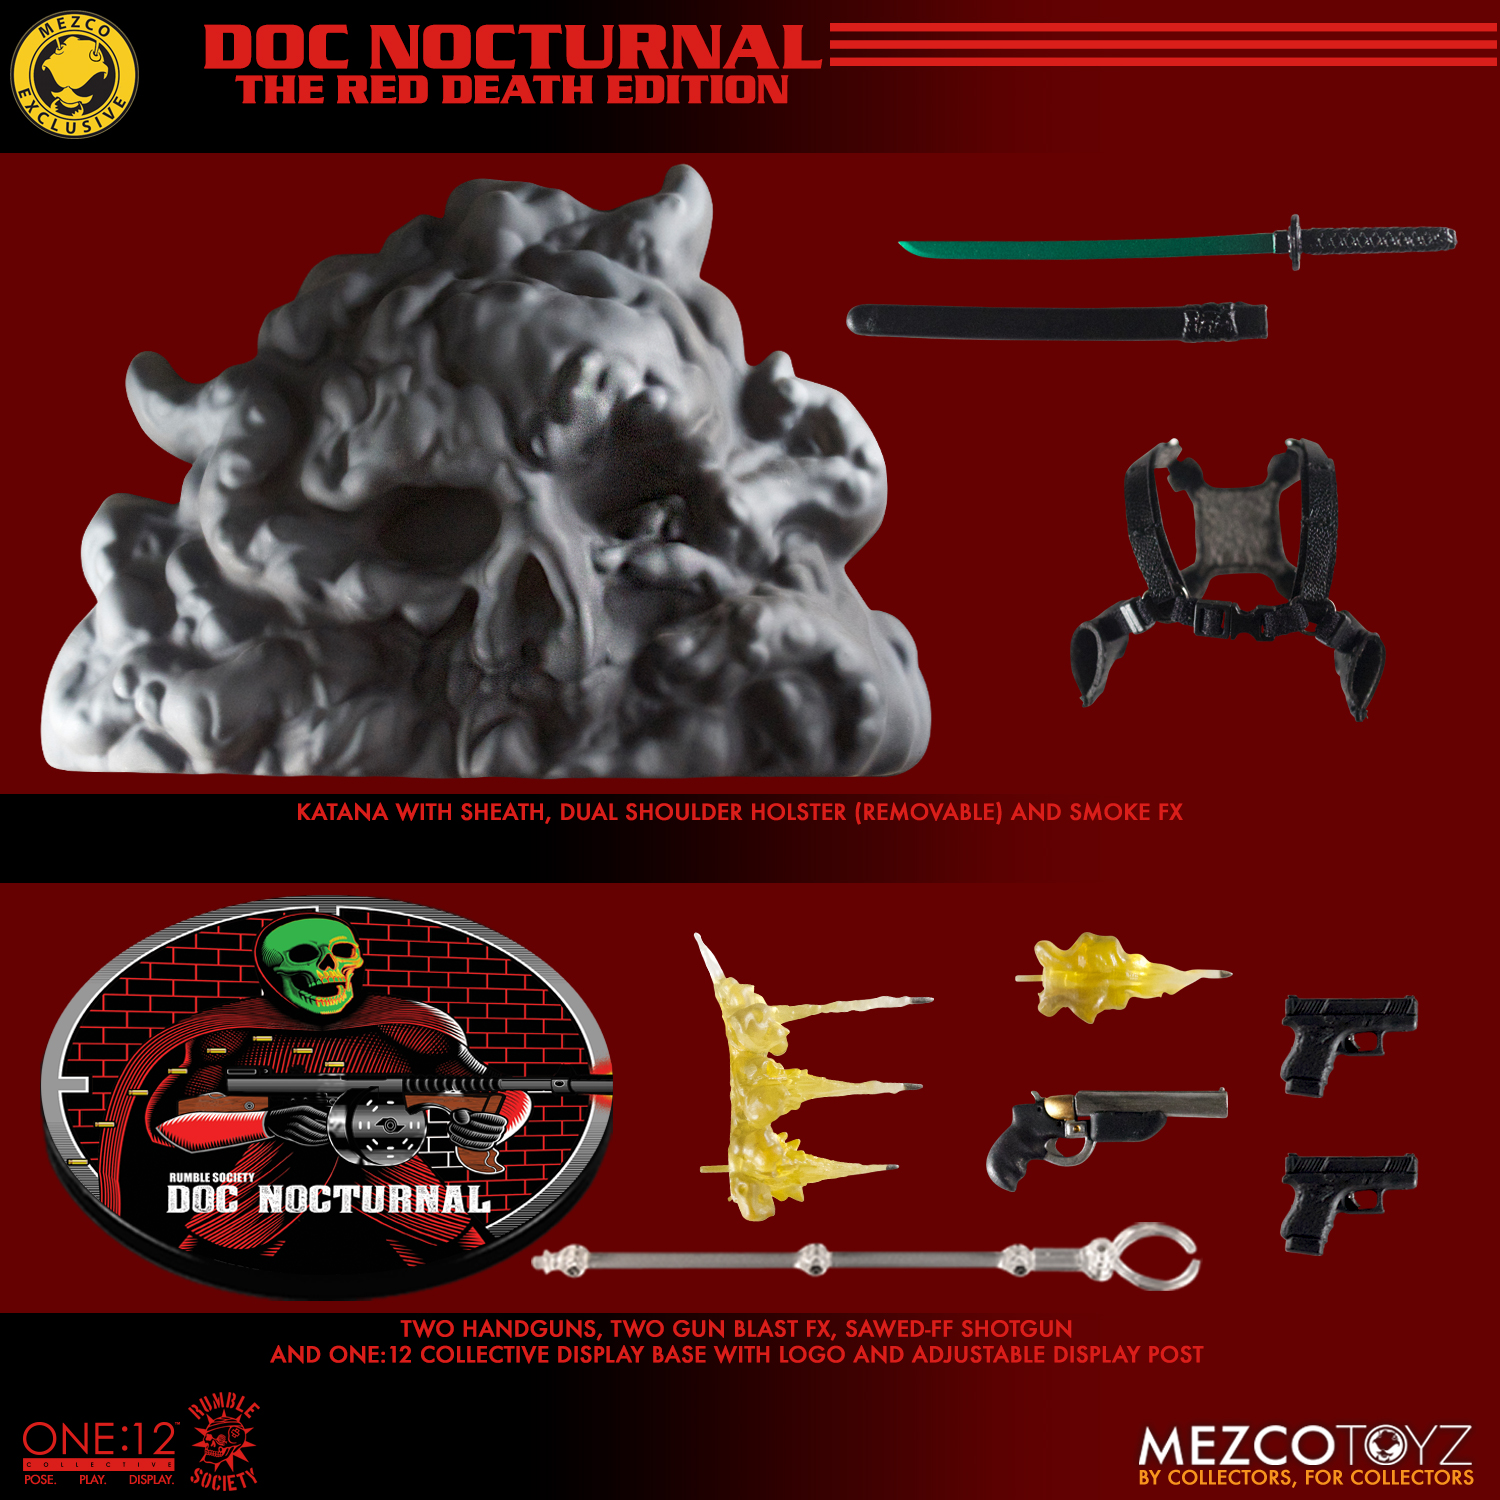 Mezco One:12 Doc Nocturnal DISPLAY BASE ADJUSTABLE POSING POST and ACCESSORY BAG 